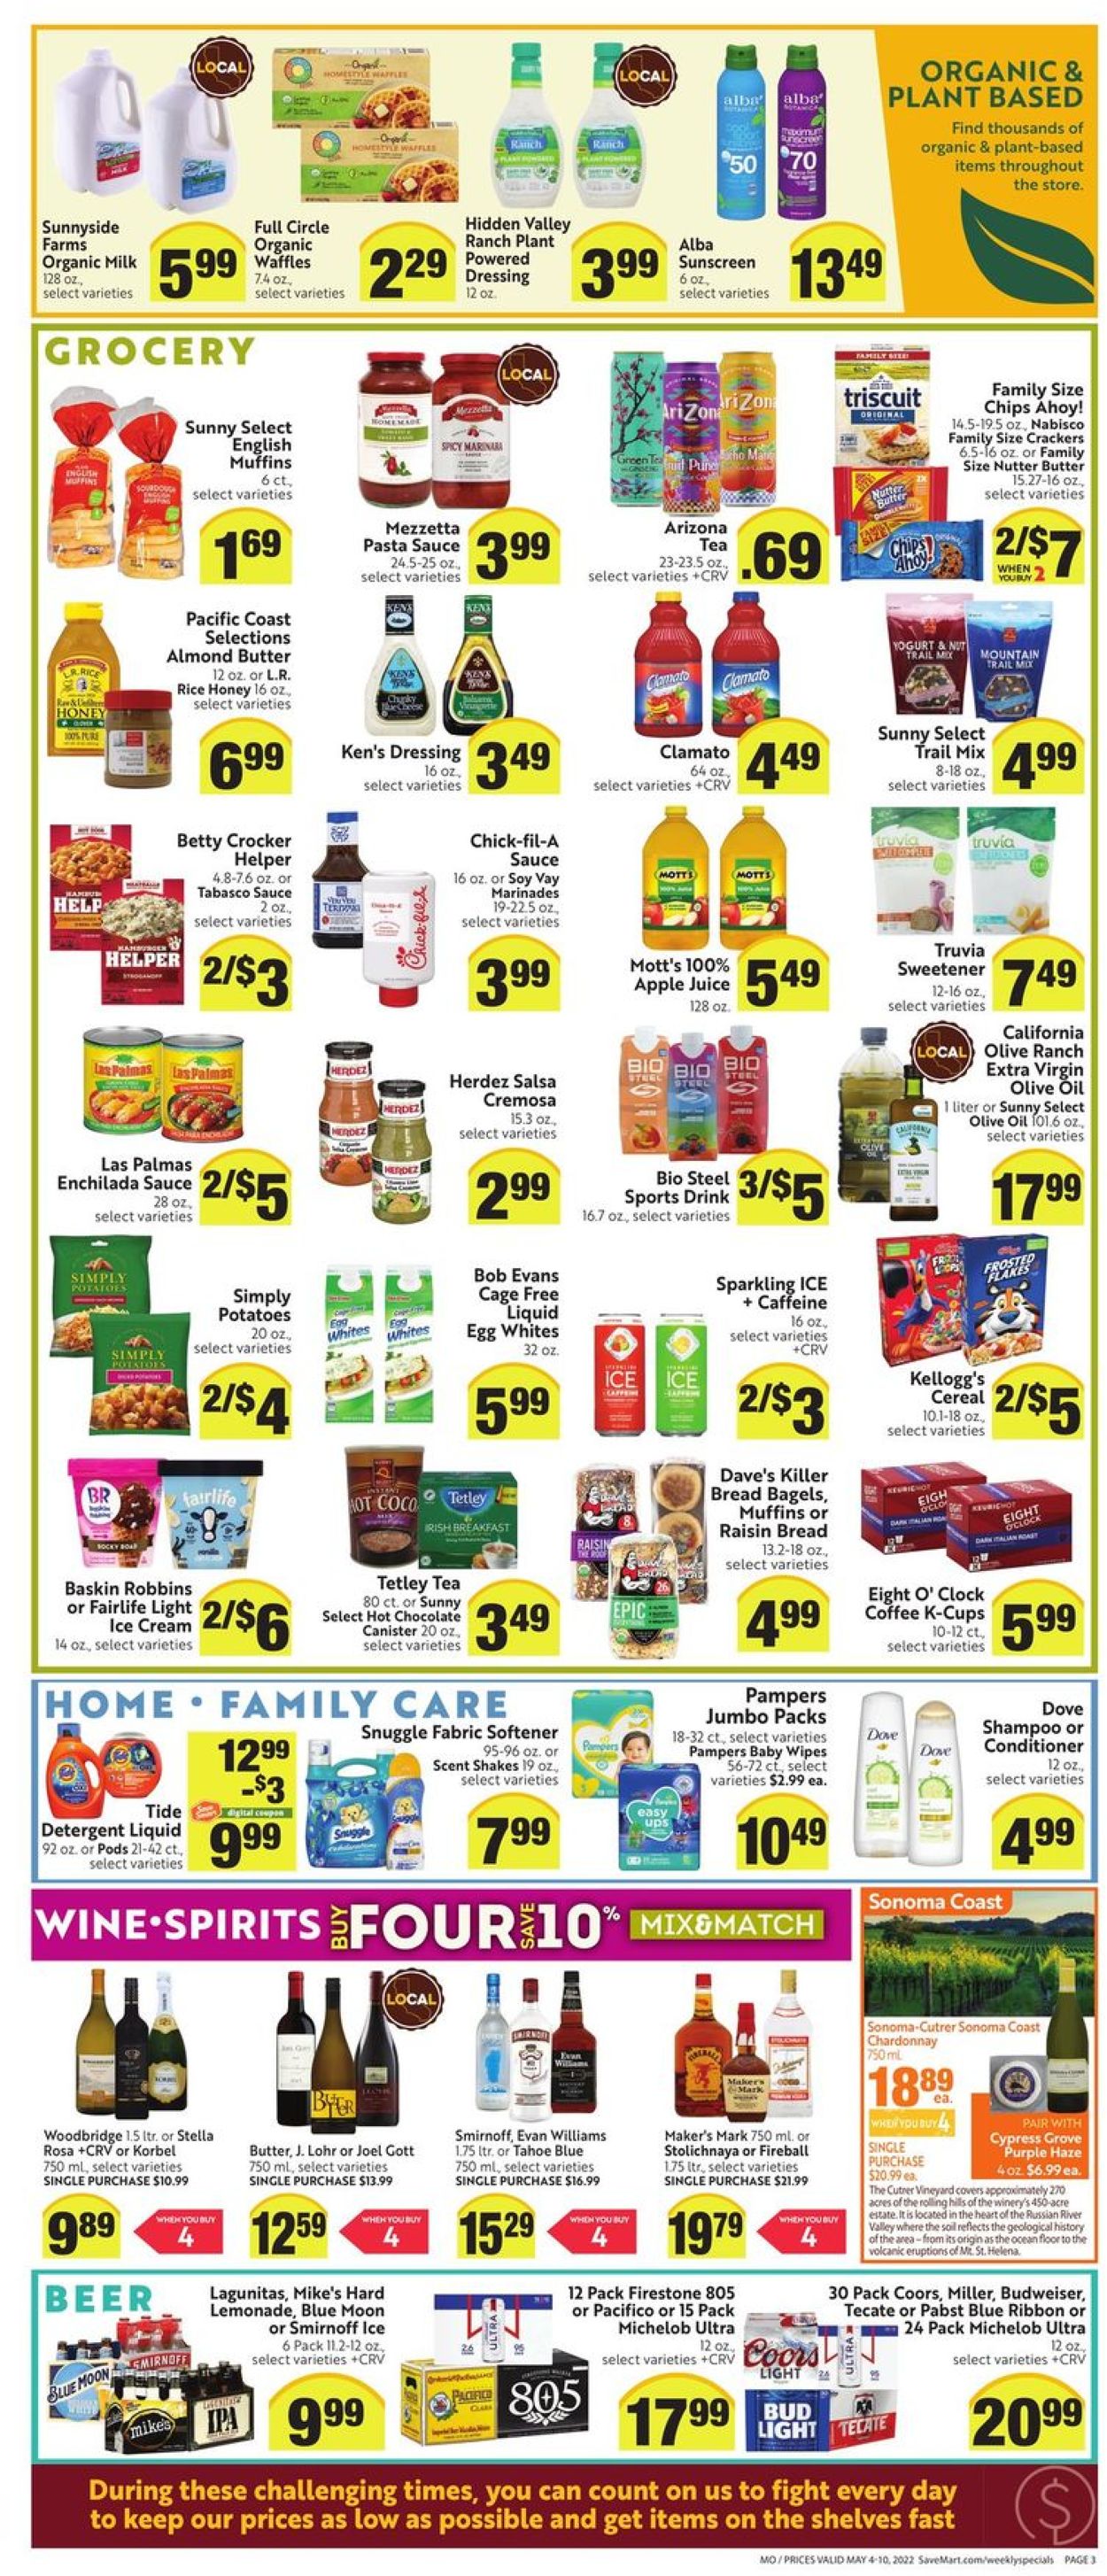 Catalogue Save Mart from 05/04/2022